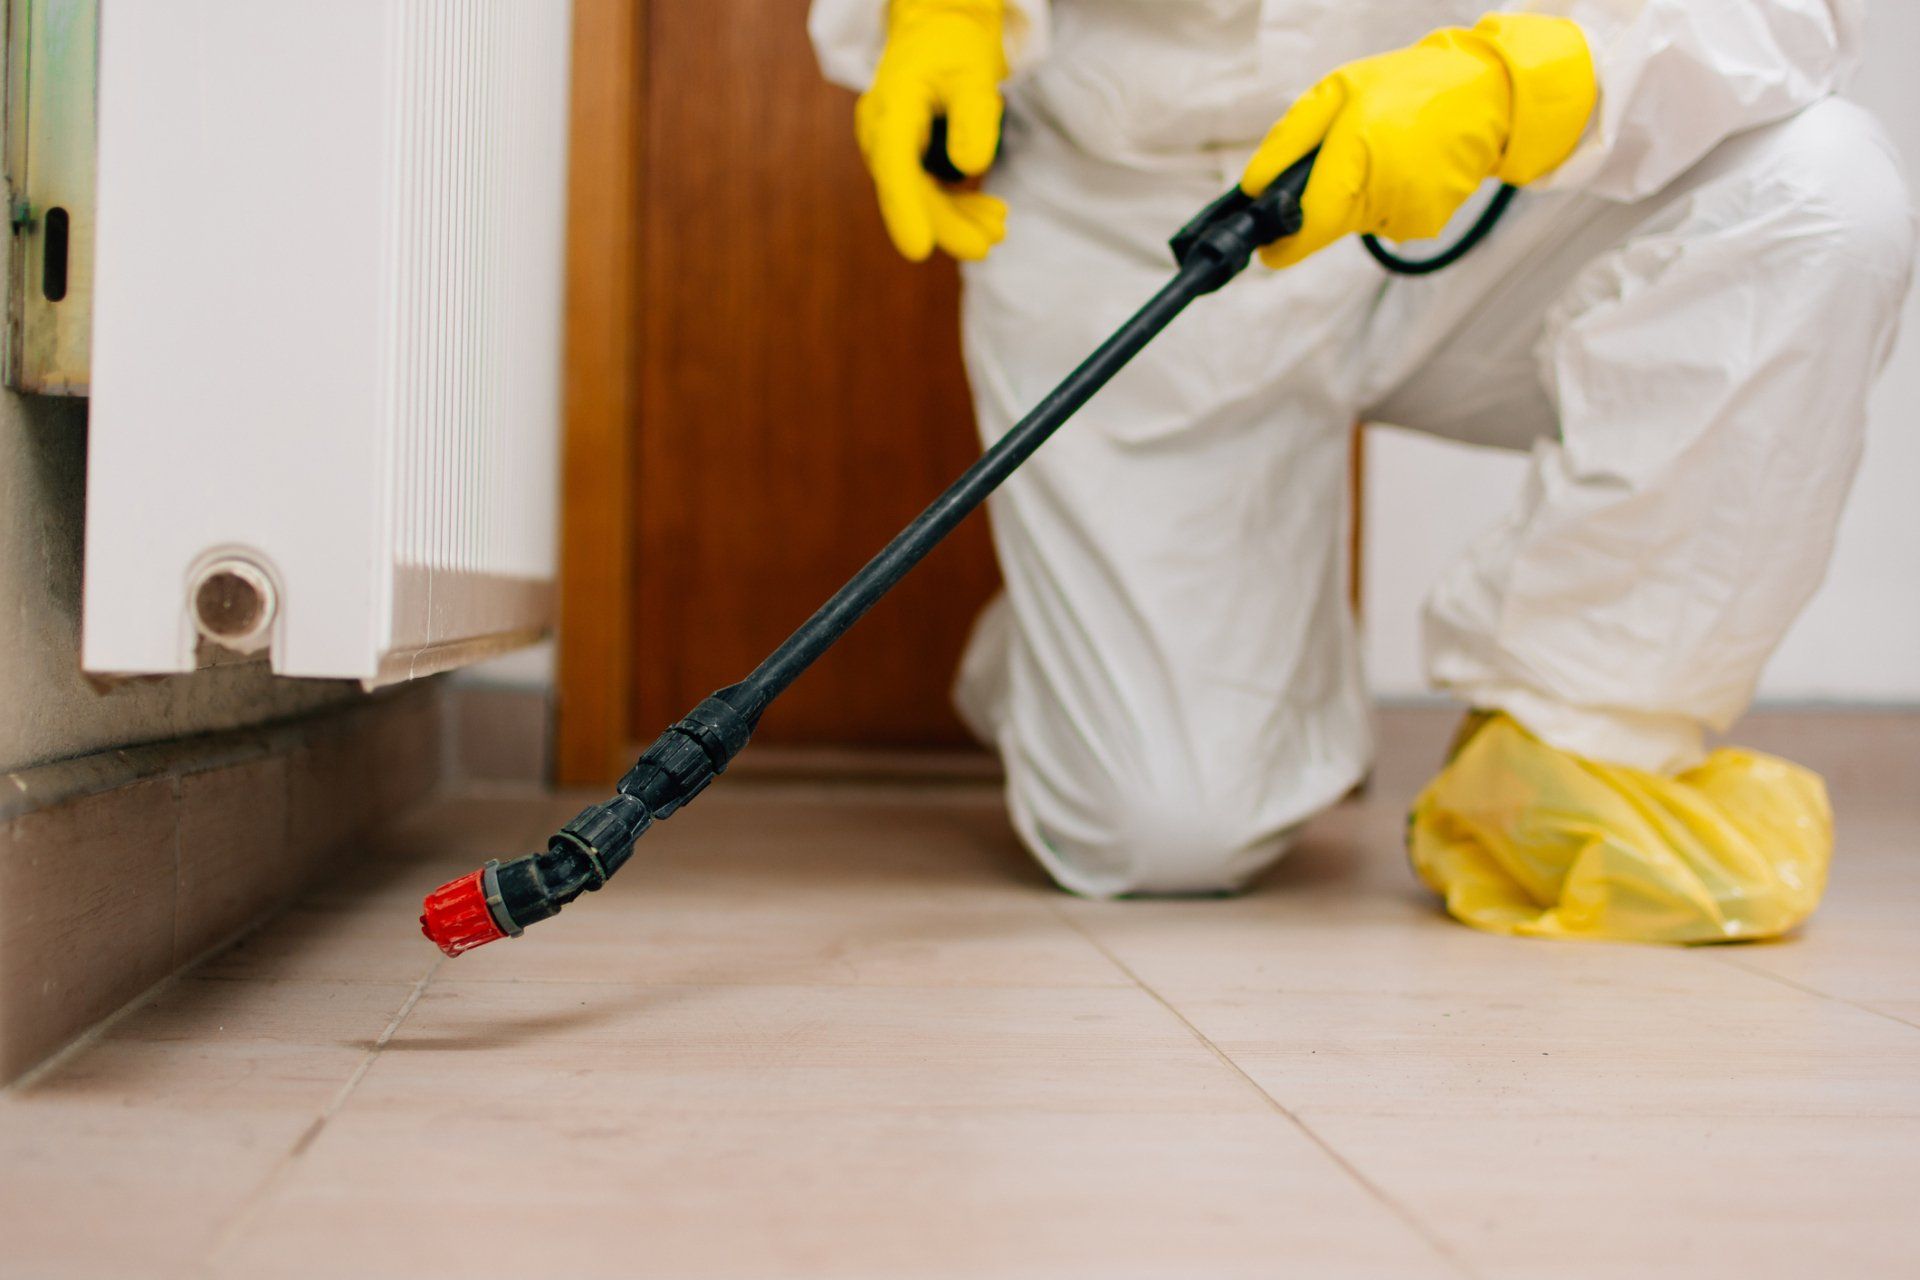 Pest Control Exterminator Services Spraying Insecticide - Warner Robins, GA - Just In Case Pest Control